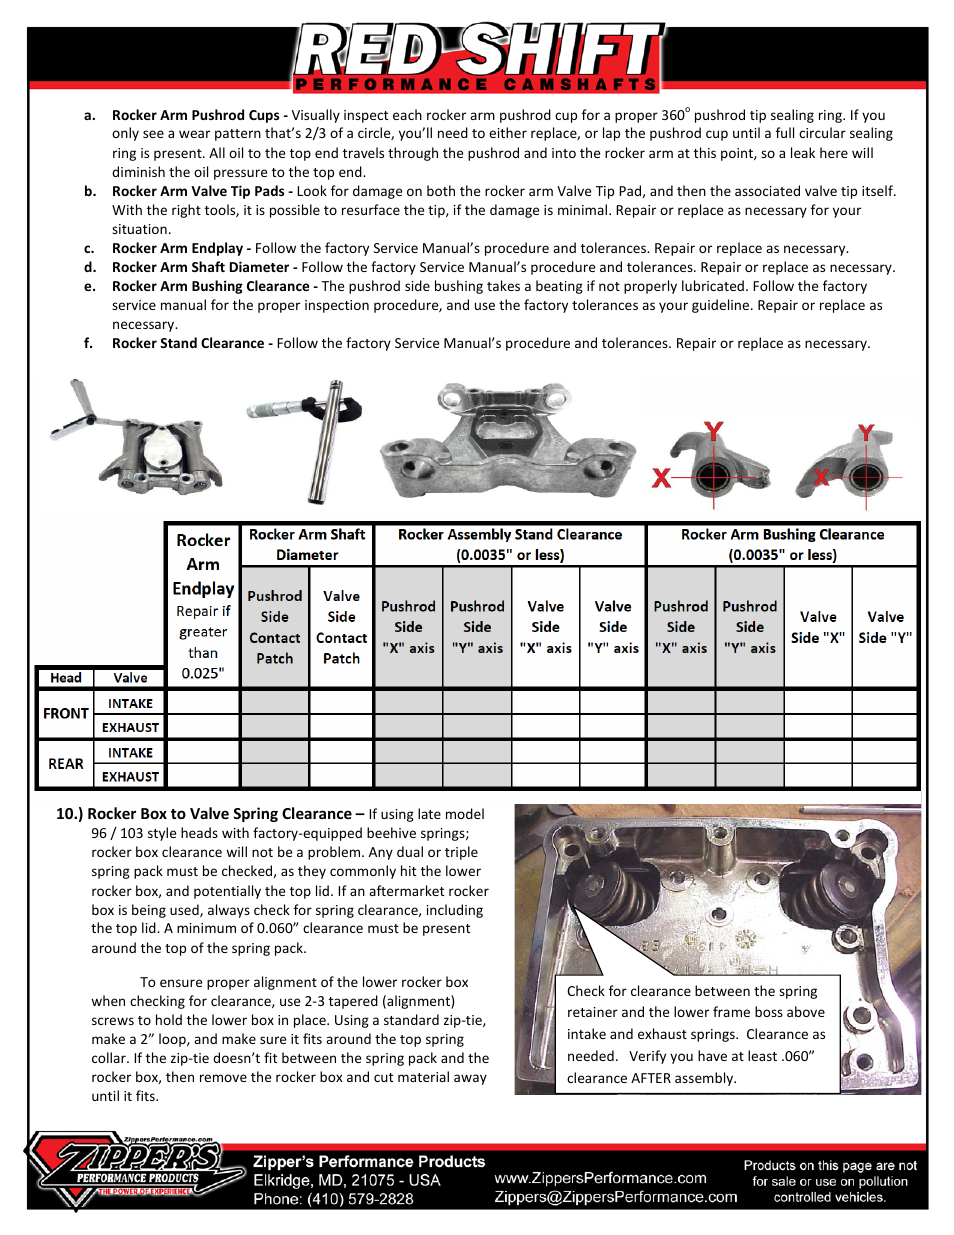 Zipper's Performance Red Shift Cams TC User Manual | Page 3 / 8